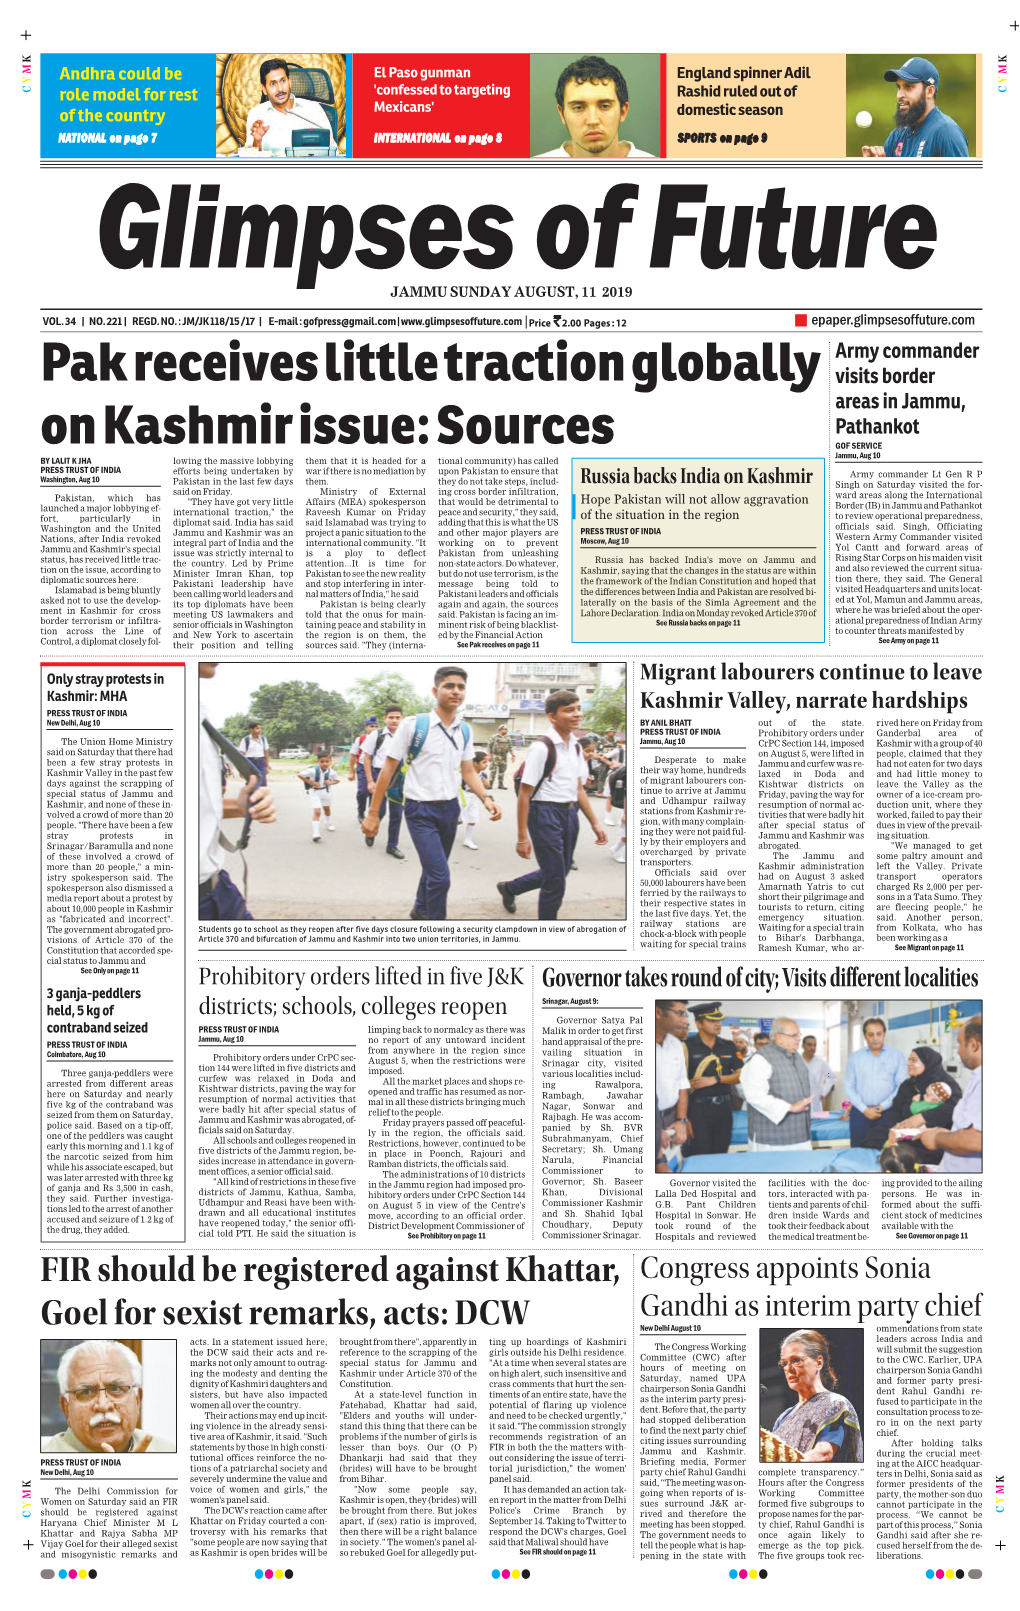 Pak Receives Little Traction Globally on Kashmir Issue